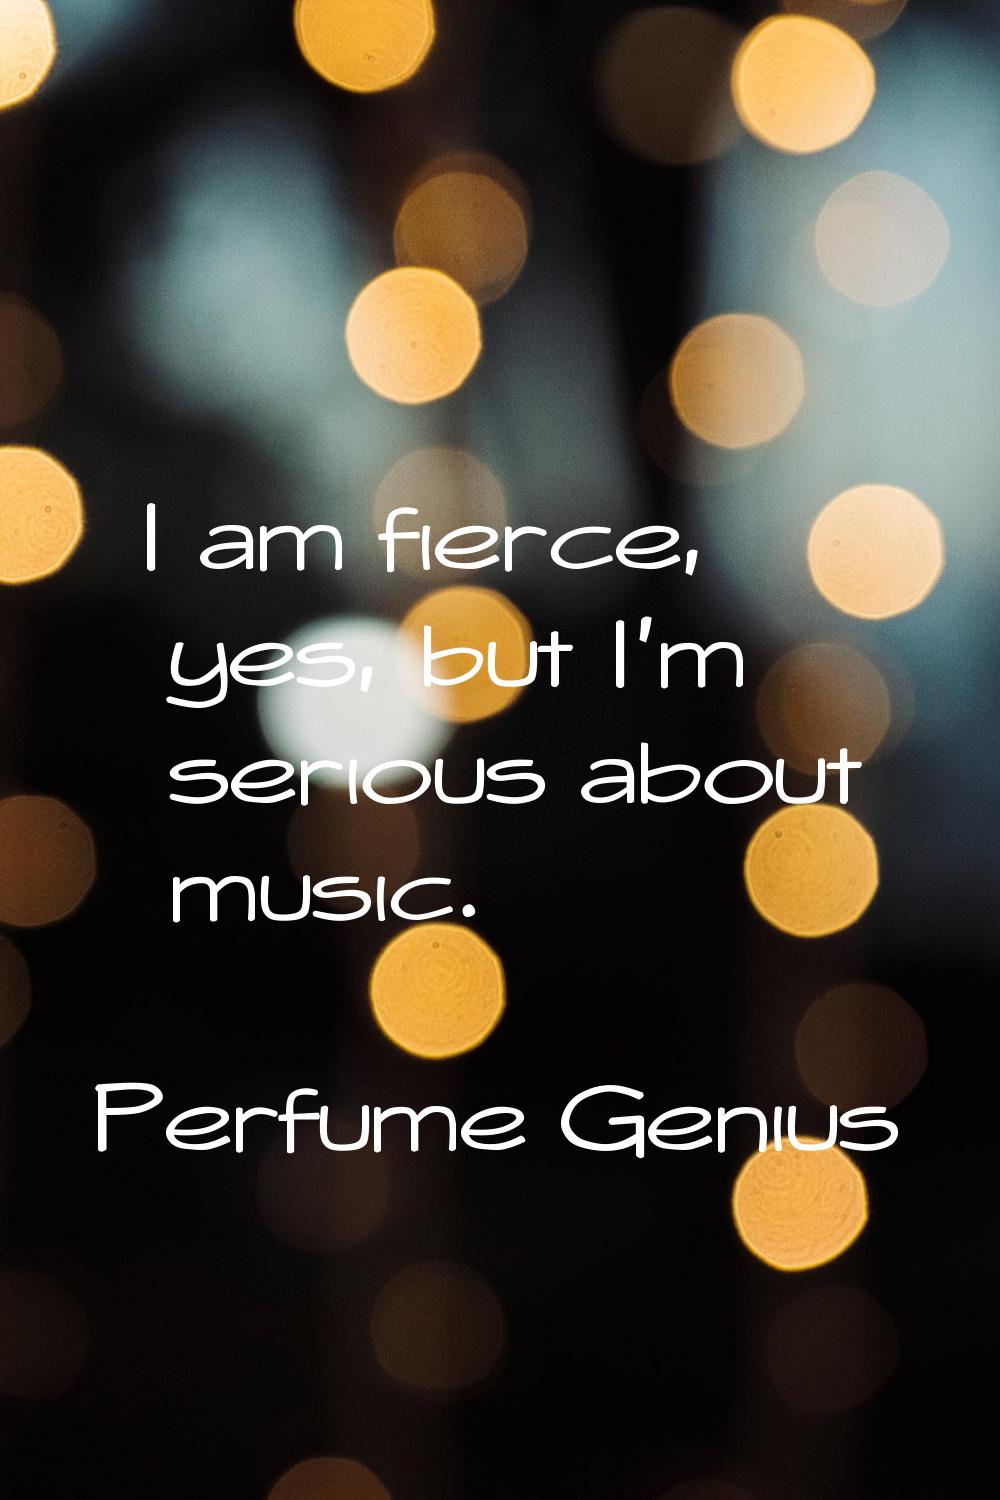 I am fierce, yes, but I'm serious about music.